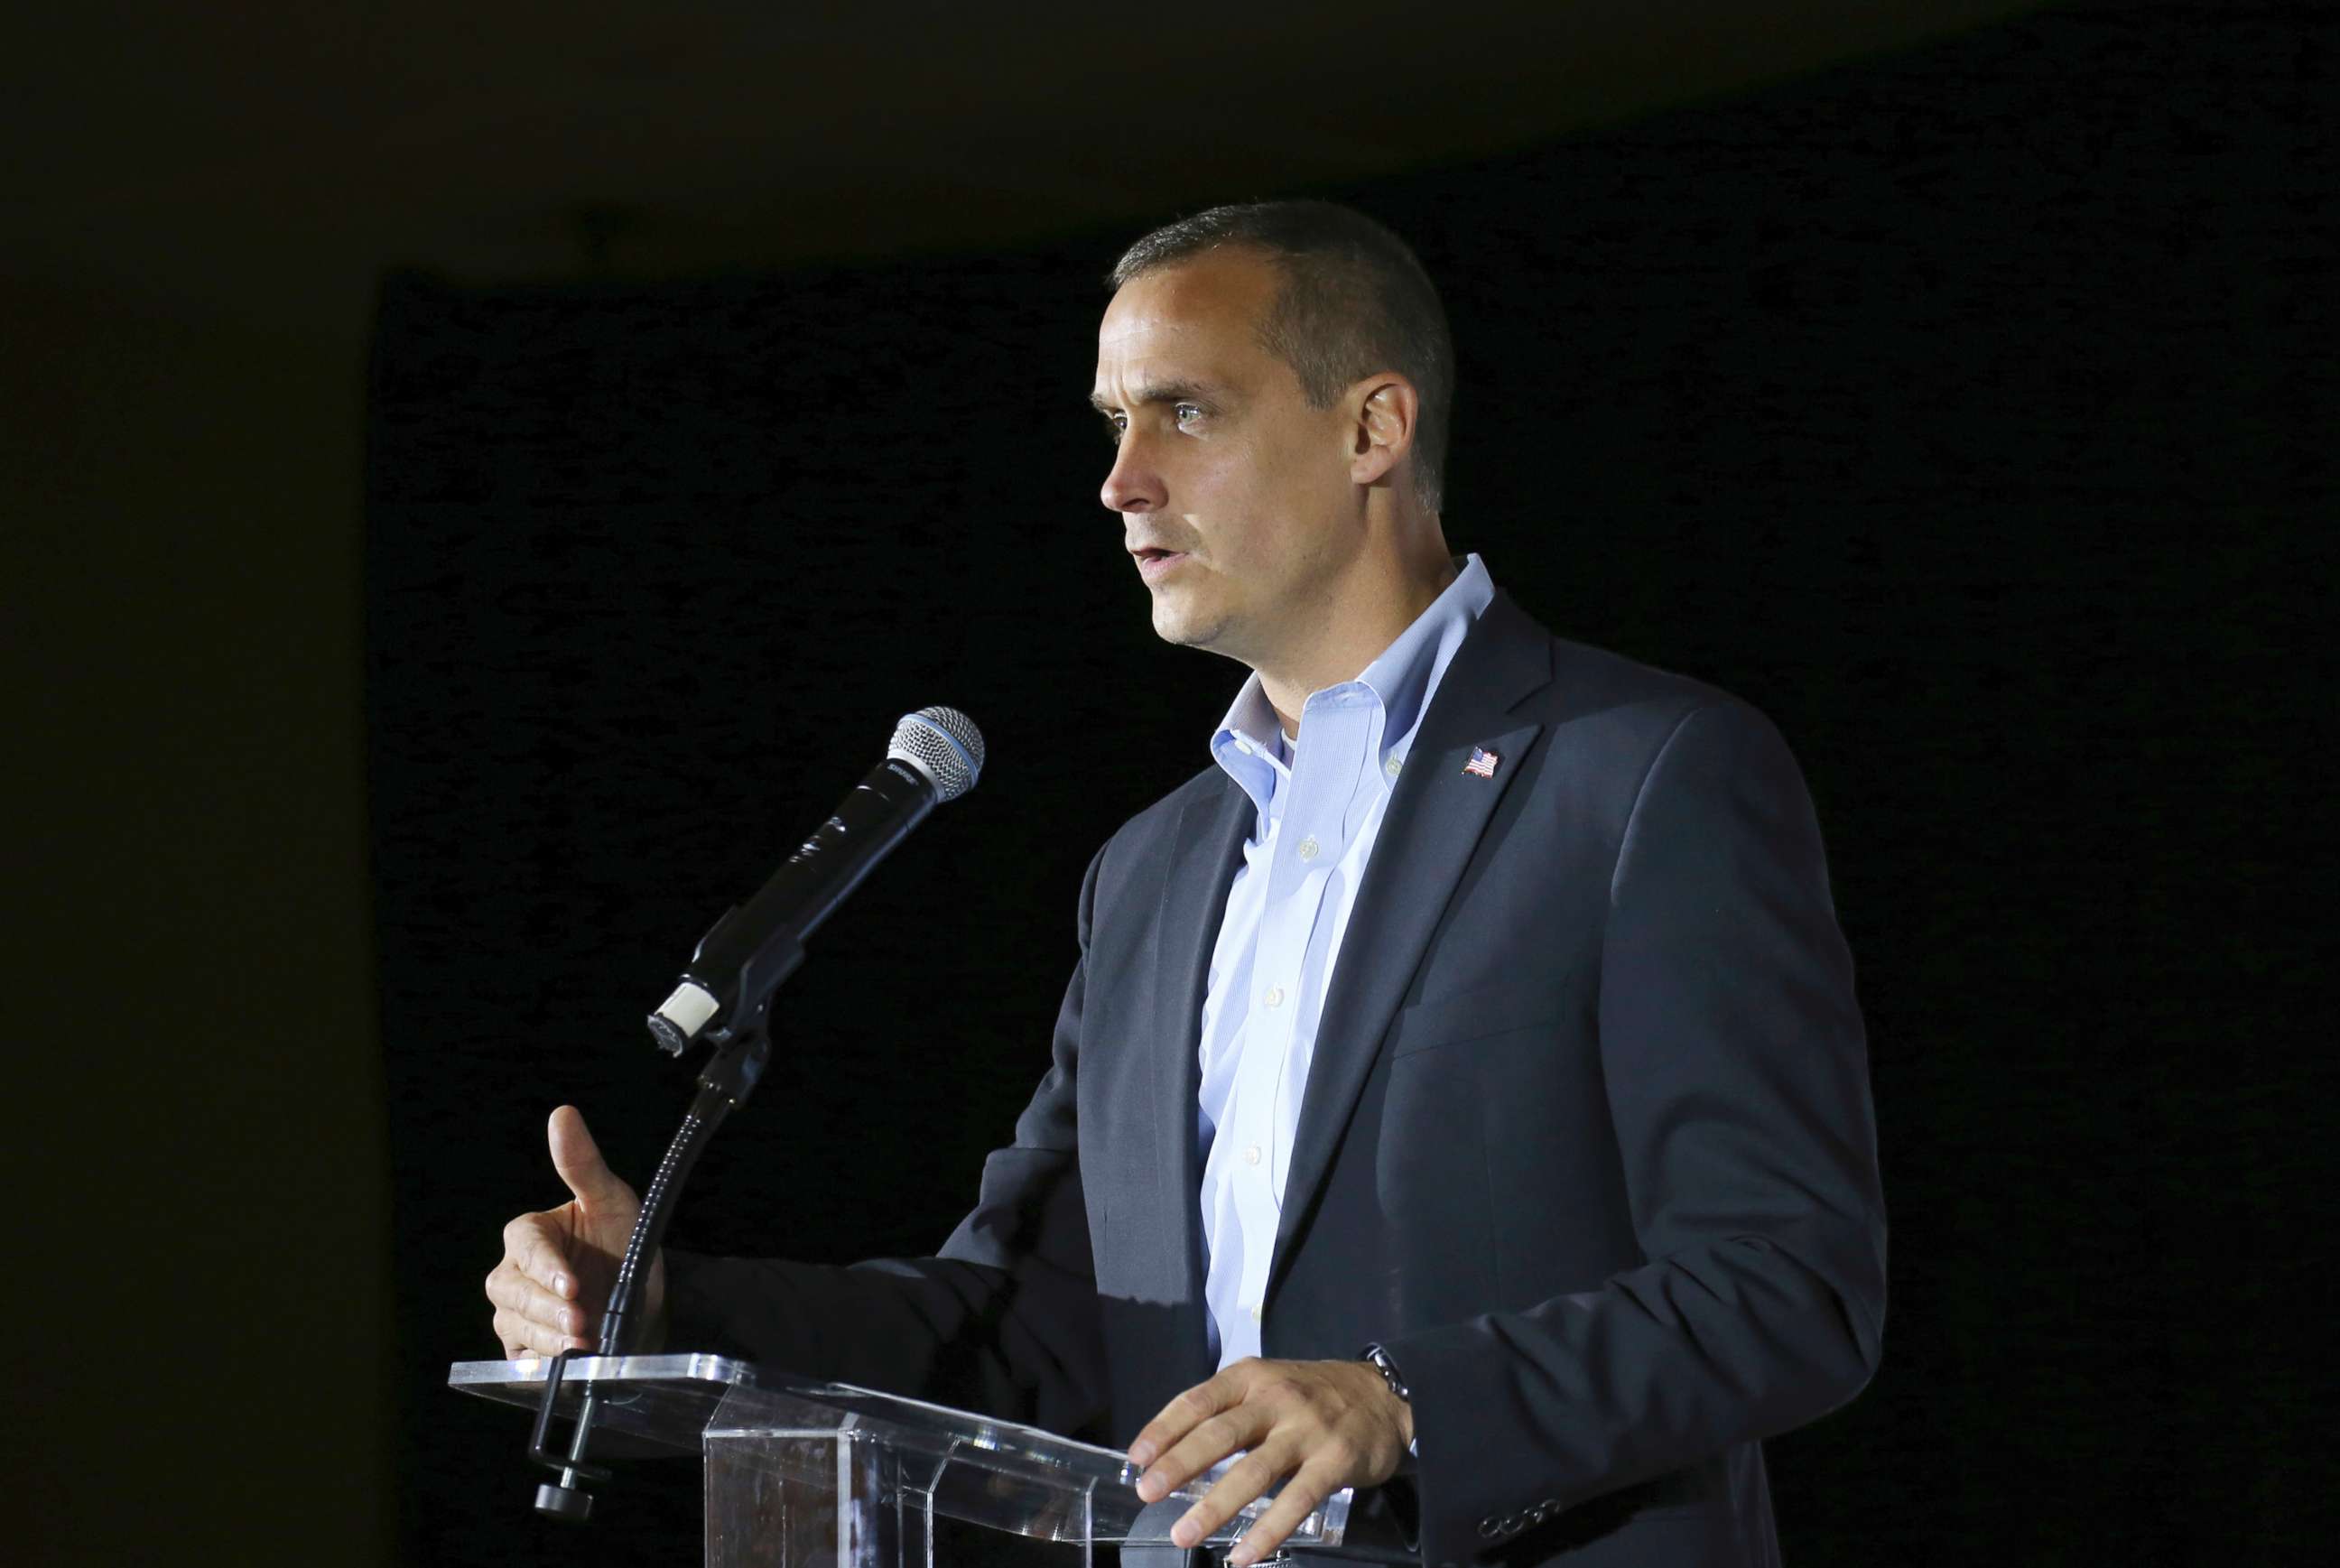 PHOTO: Corey Lewandowski, the former campaign manager for President Donald Trump, speaks during an event in Manchester, N.H., in this Nov. 9, 2017 file photo.